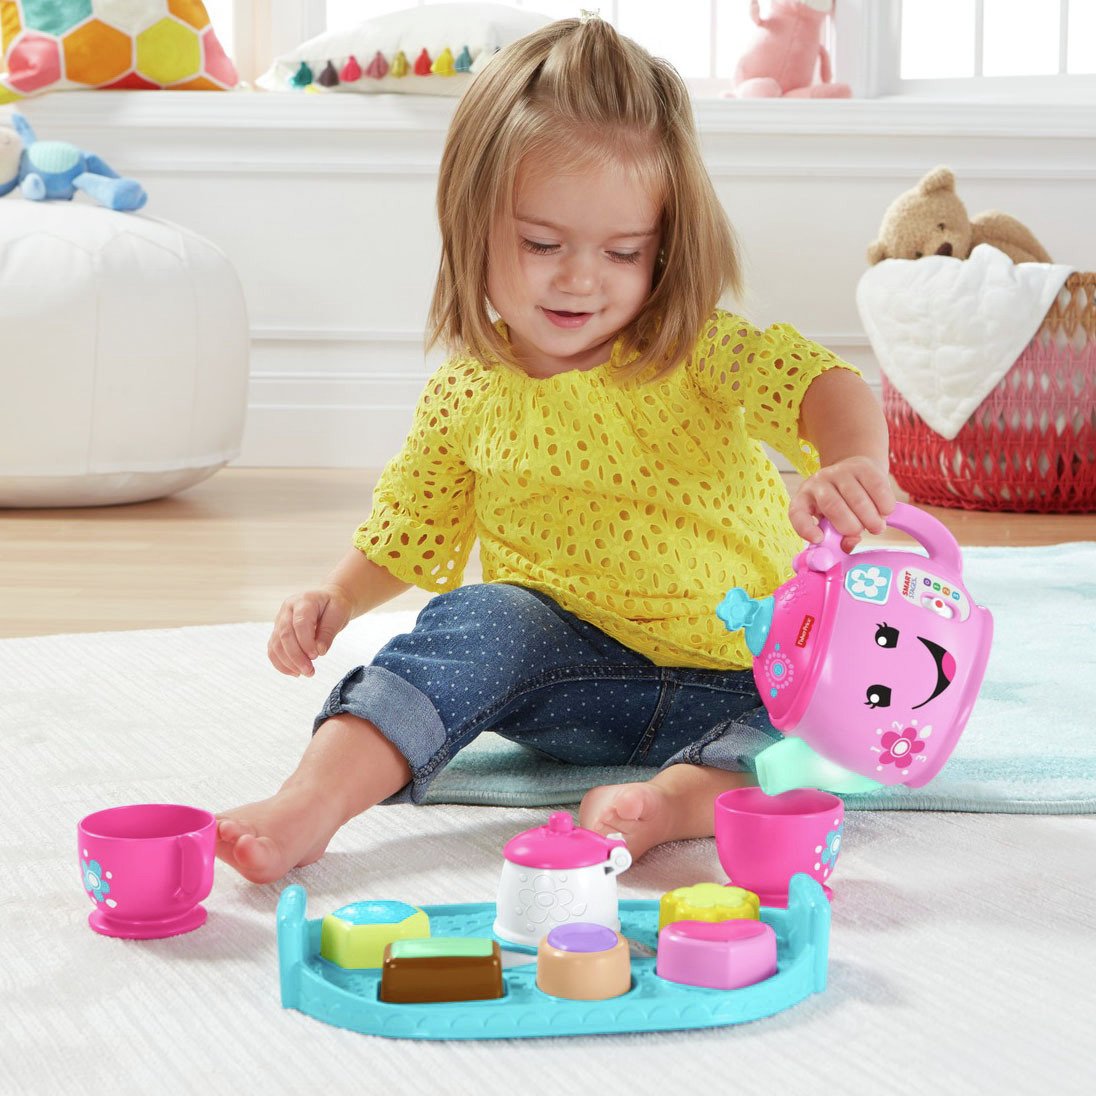 Fisher-Price Laugh & Learn Sweet Manners Tea Set review